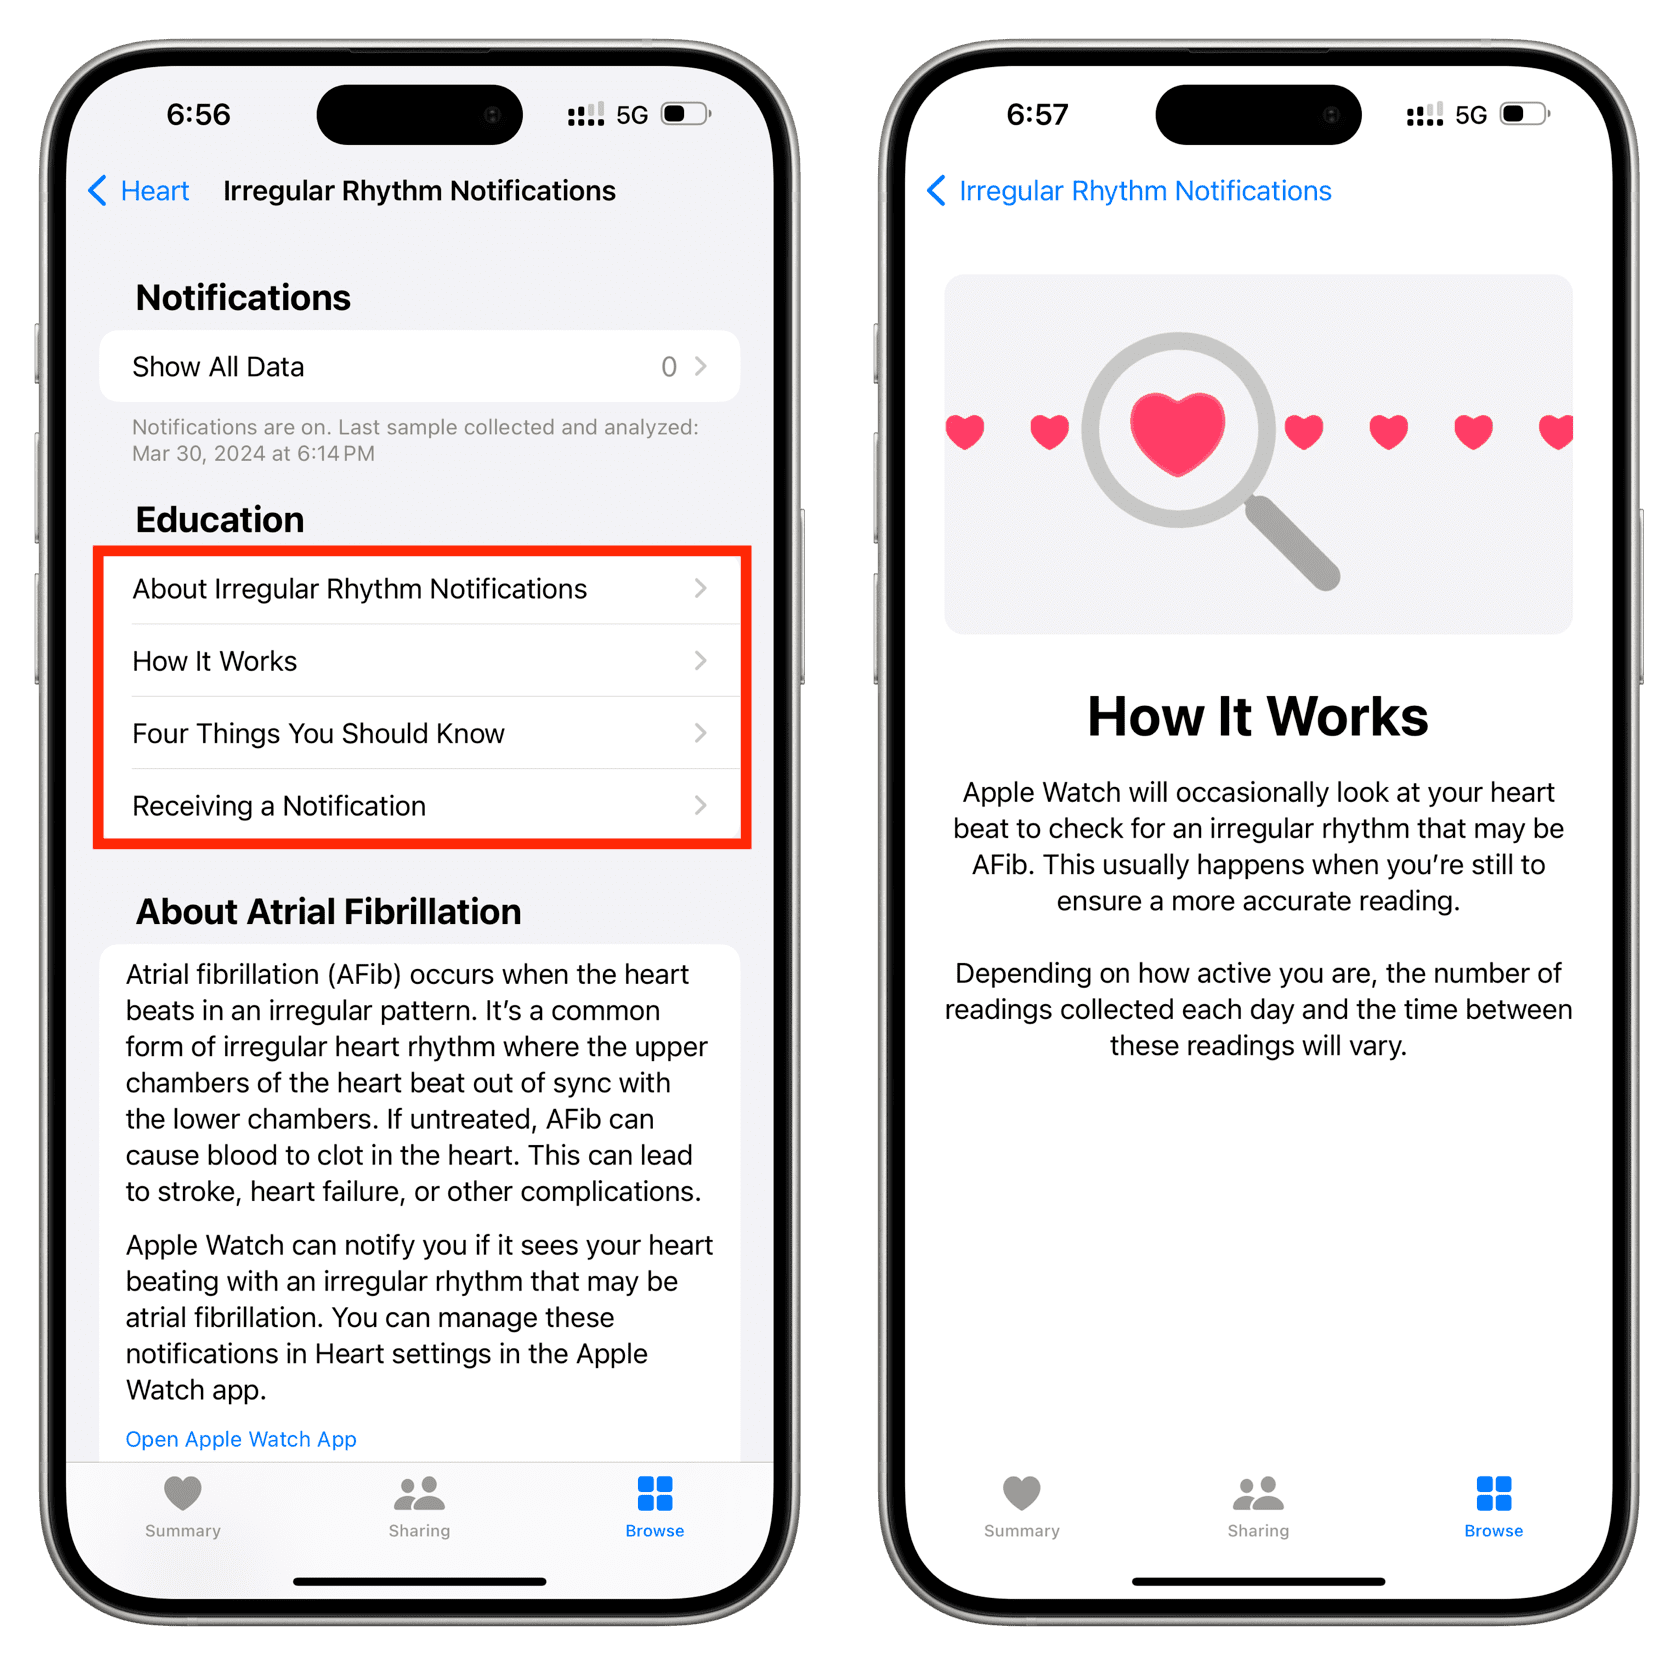 Education section of Irregular Rhythm Notifications in iPhone Health app